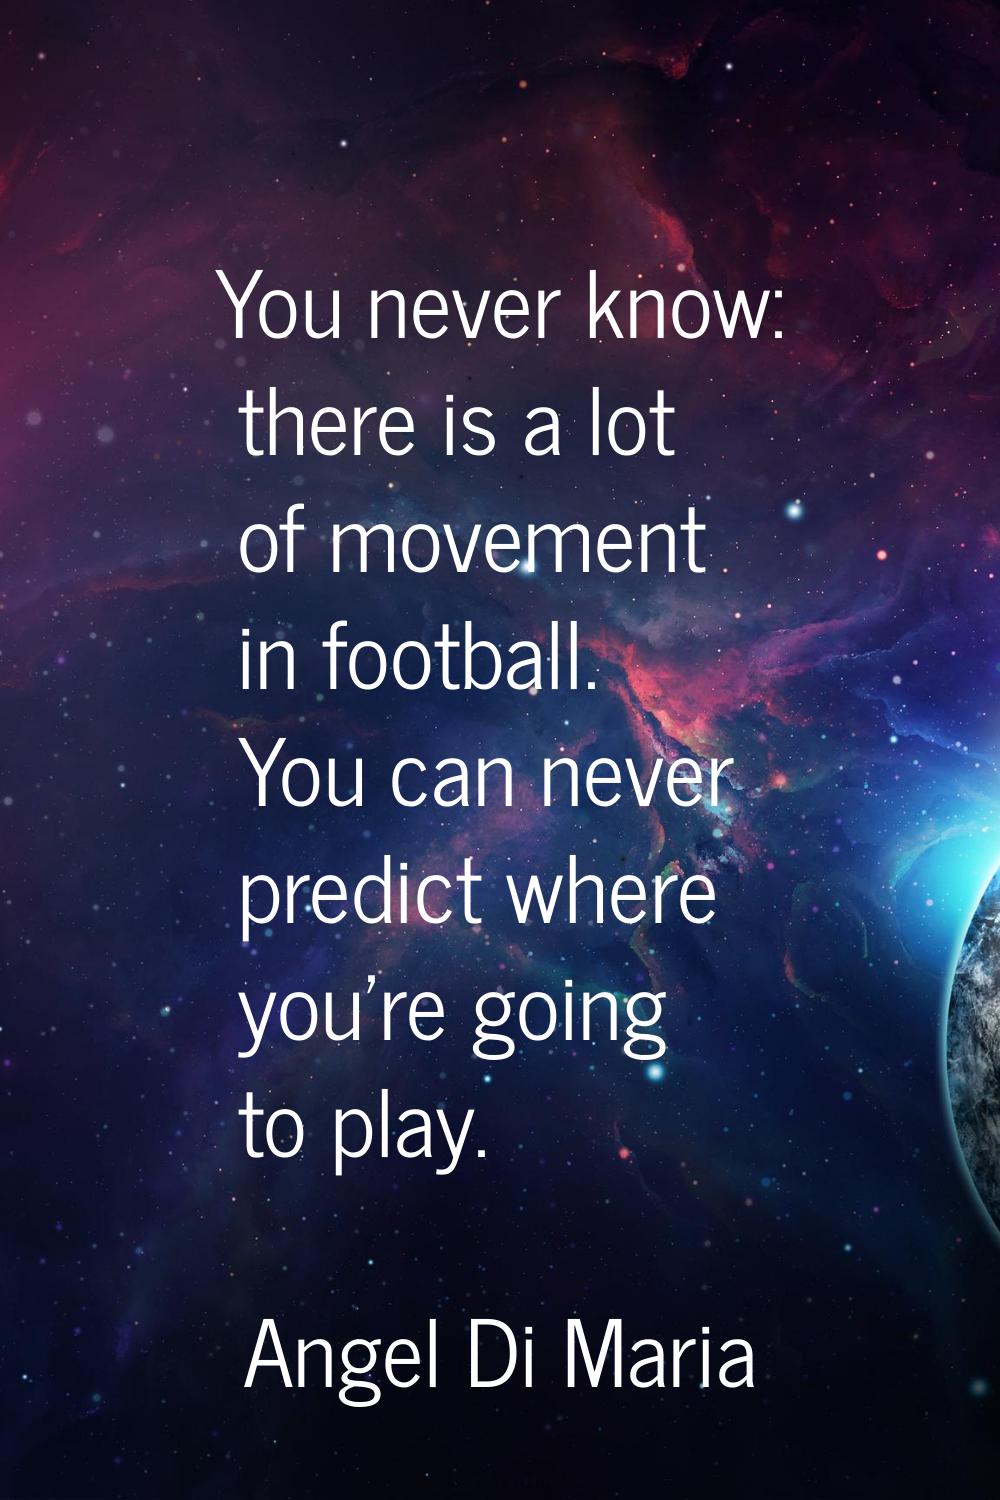 You never know: there is a lot of movement in football. You can never predict where you're going to